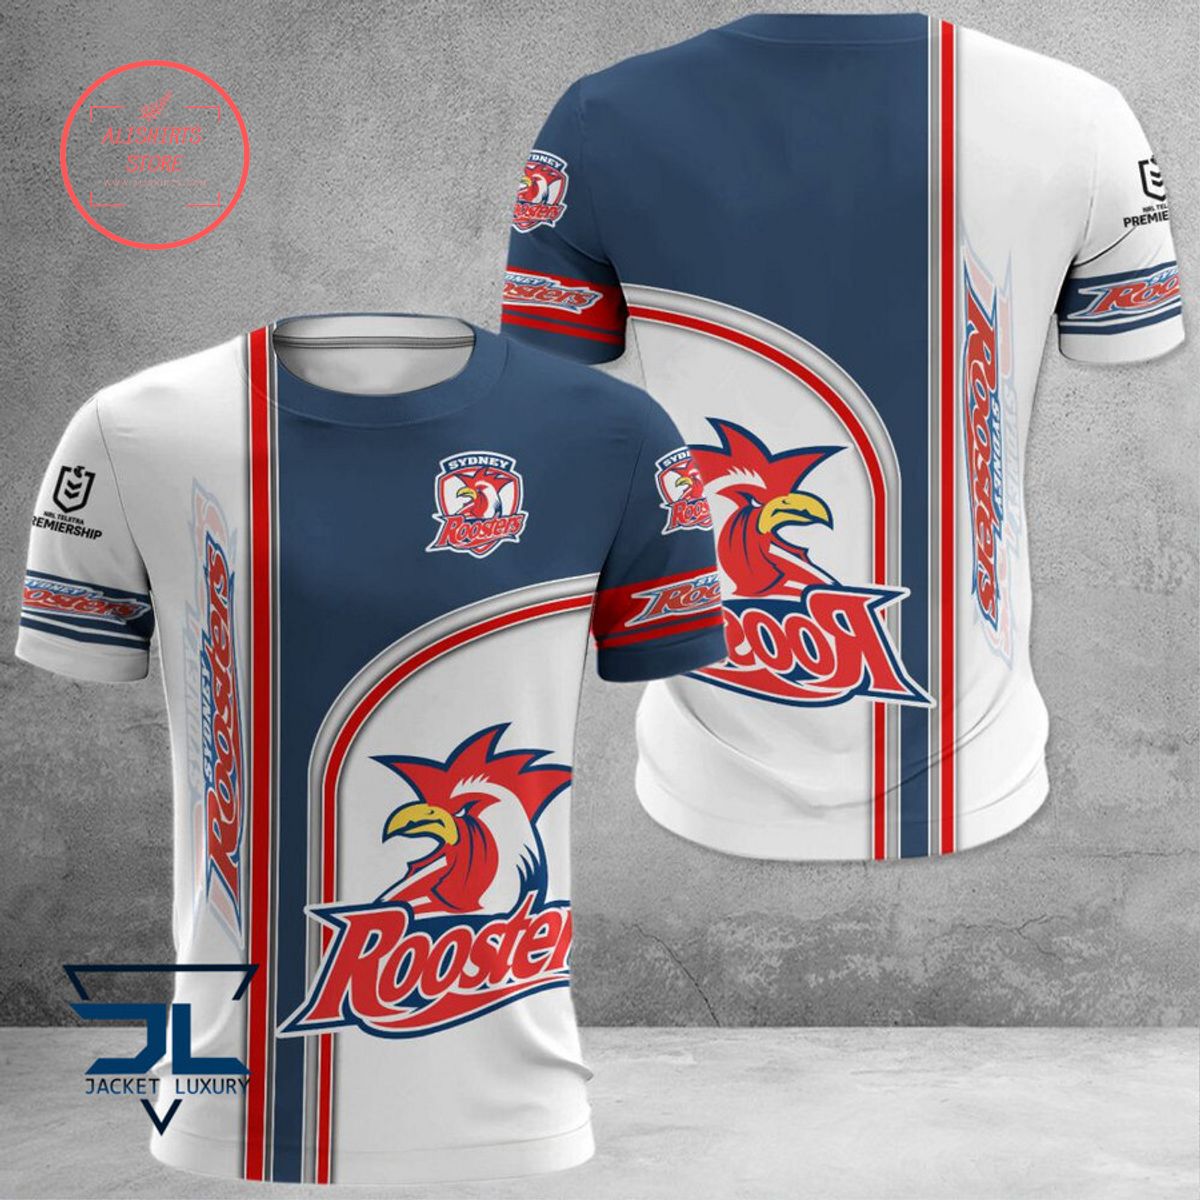 Sydney Roosters Polo Shirt